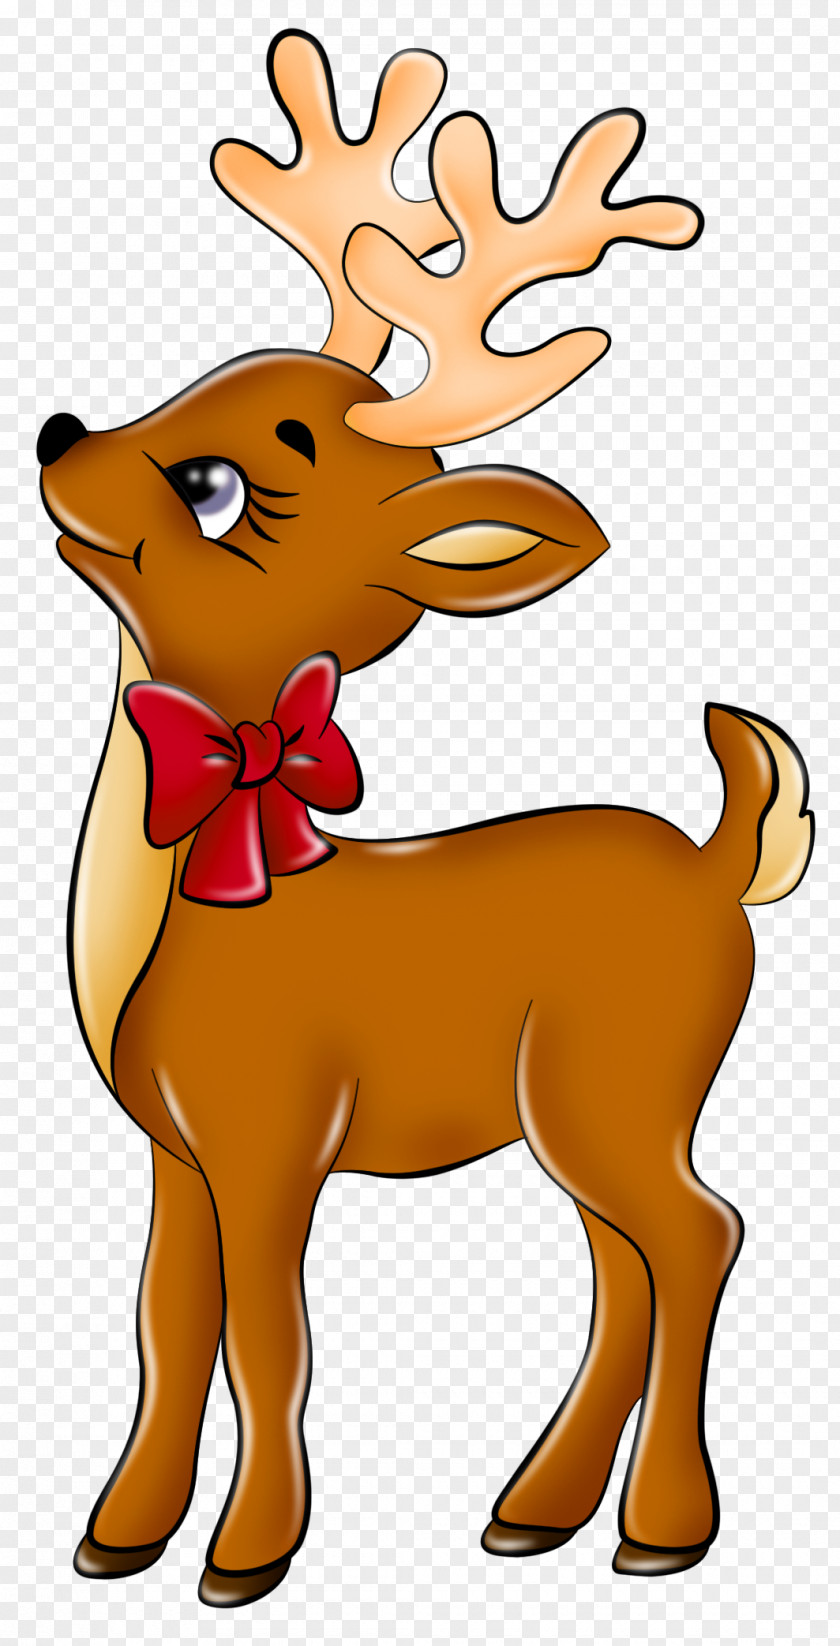 Fancy Reindeer Cliparts Rudolph The Red-Nosed Santa Claus Clip Art PNG